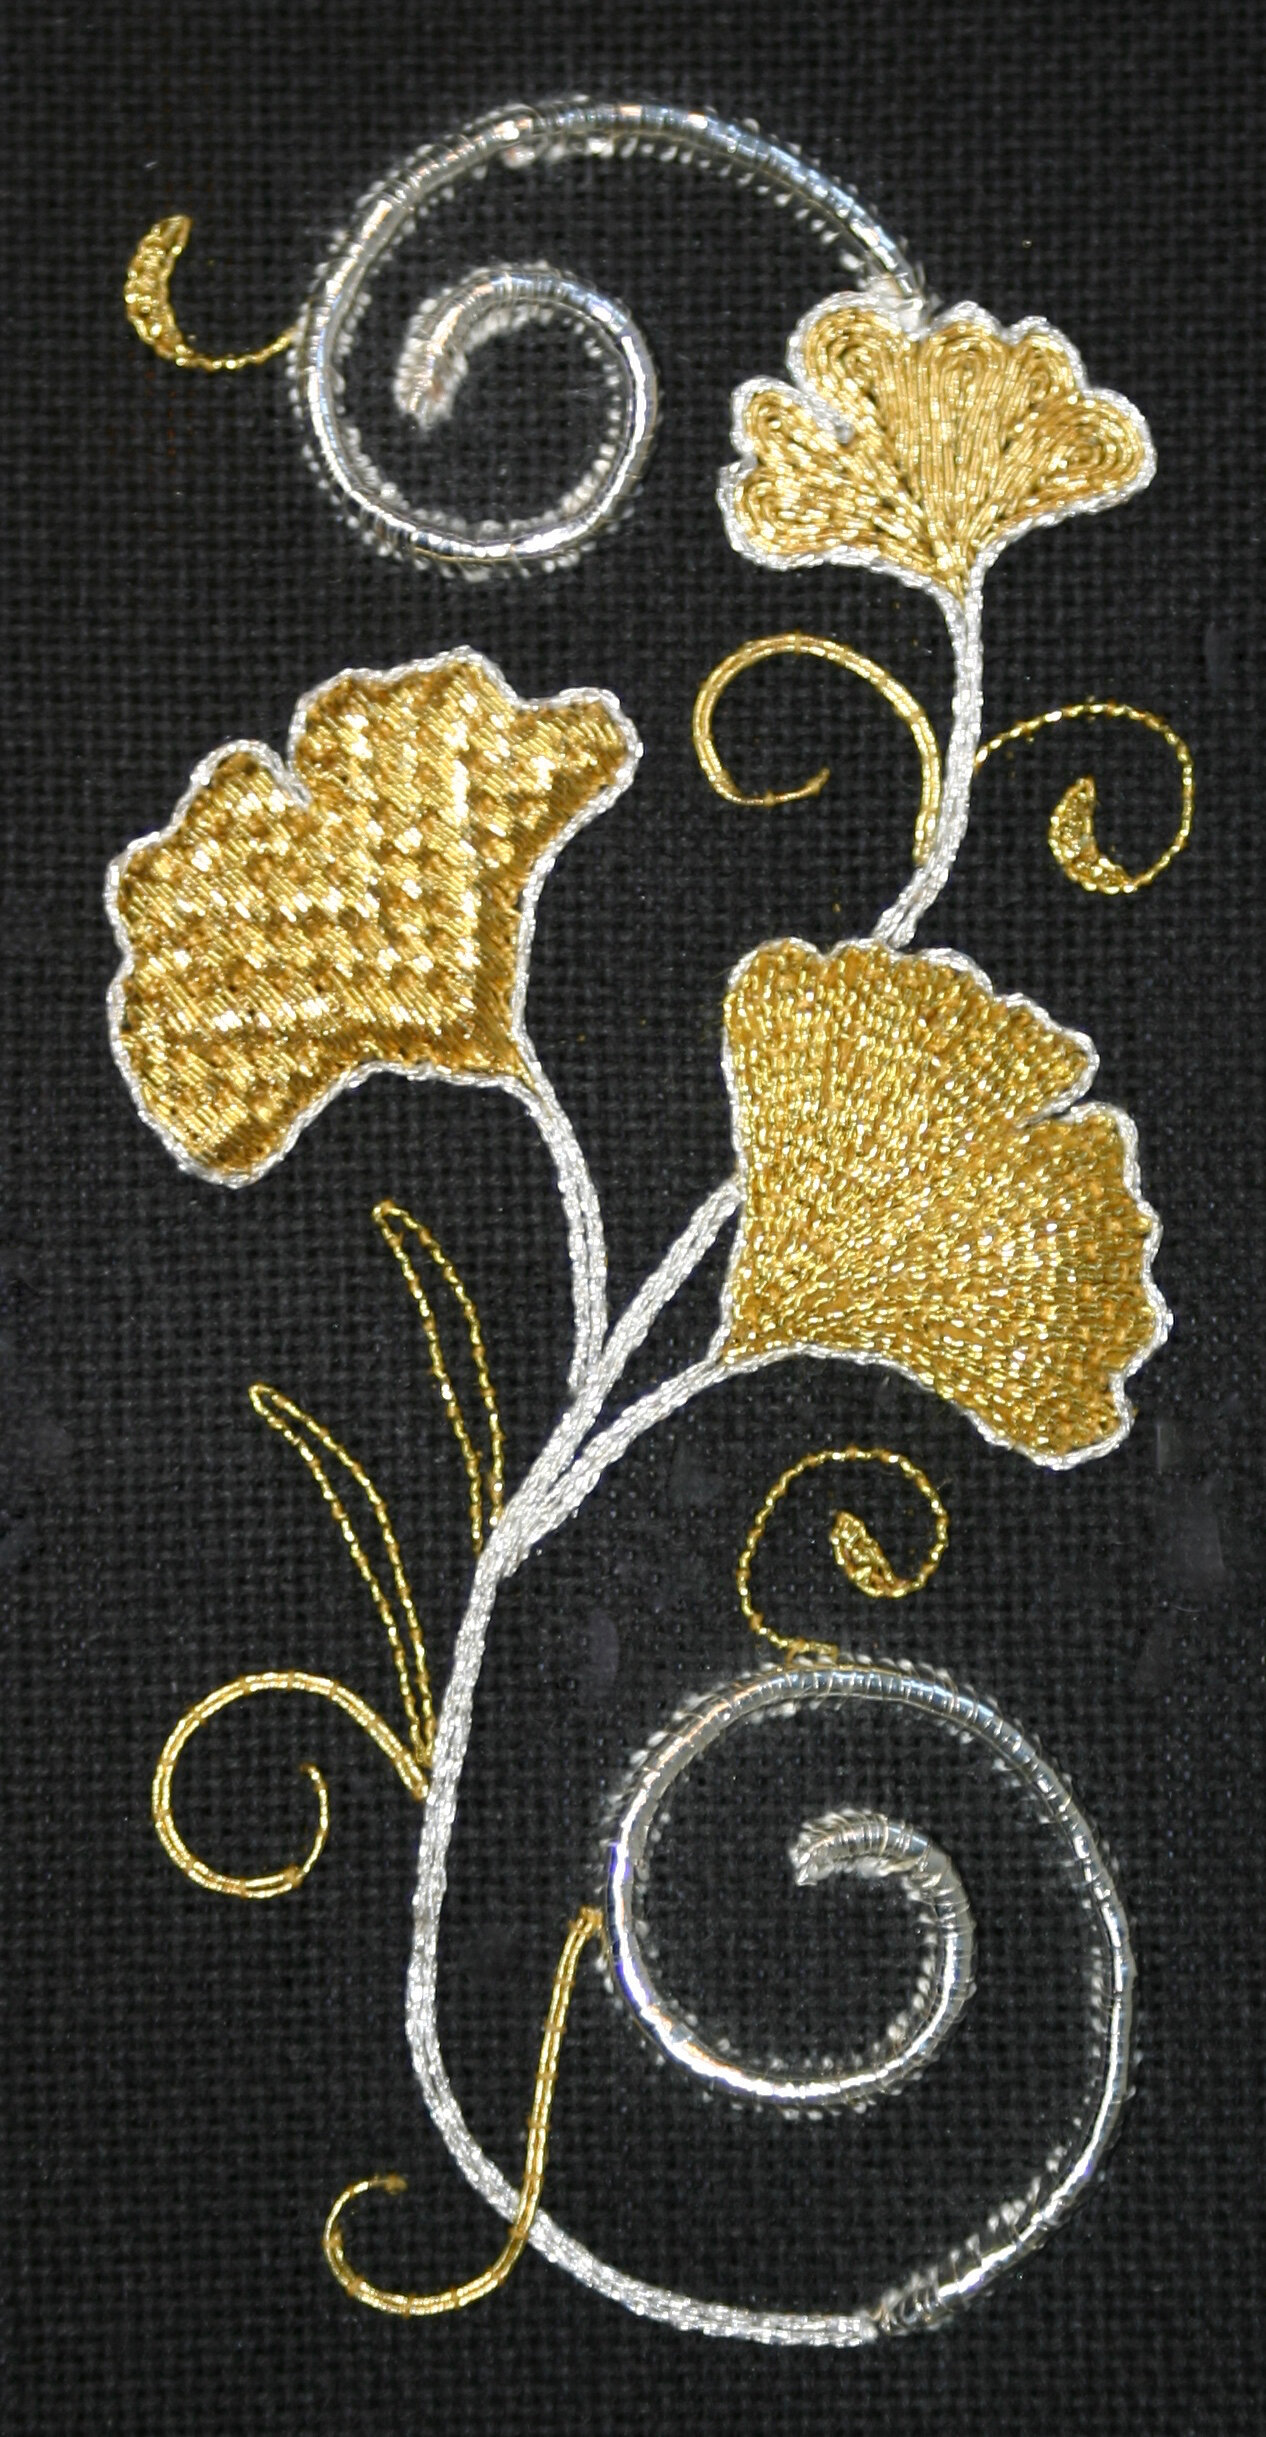 North End  Golden Stiches Embroidery